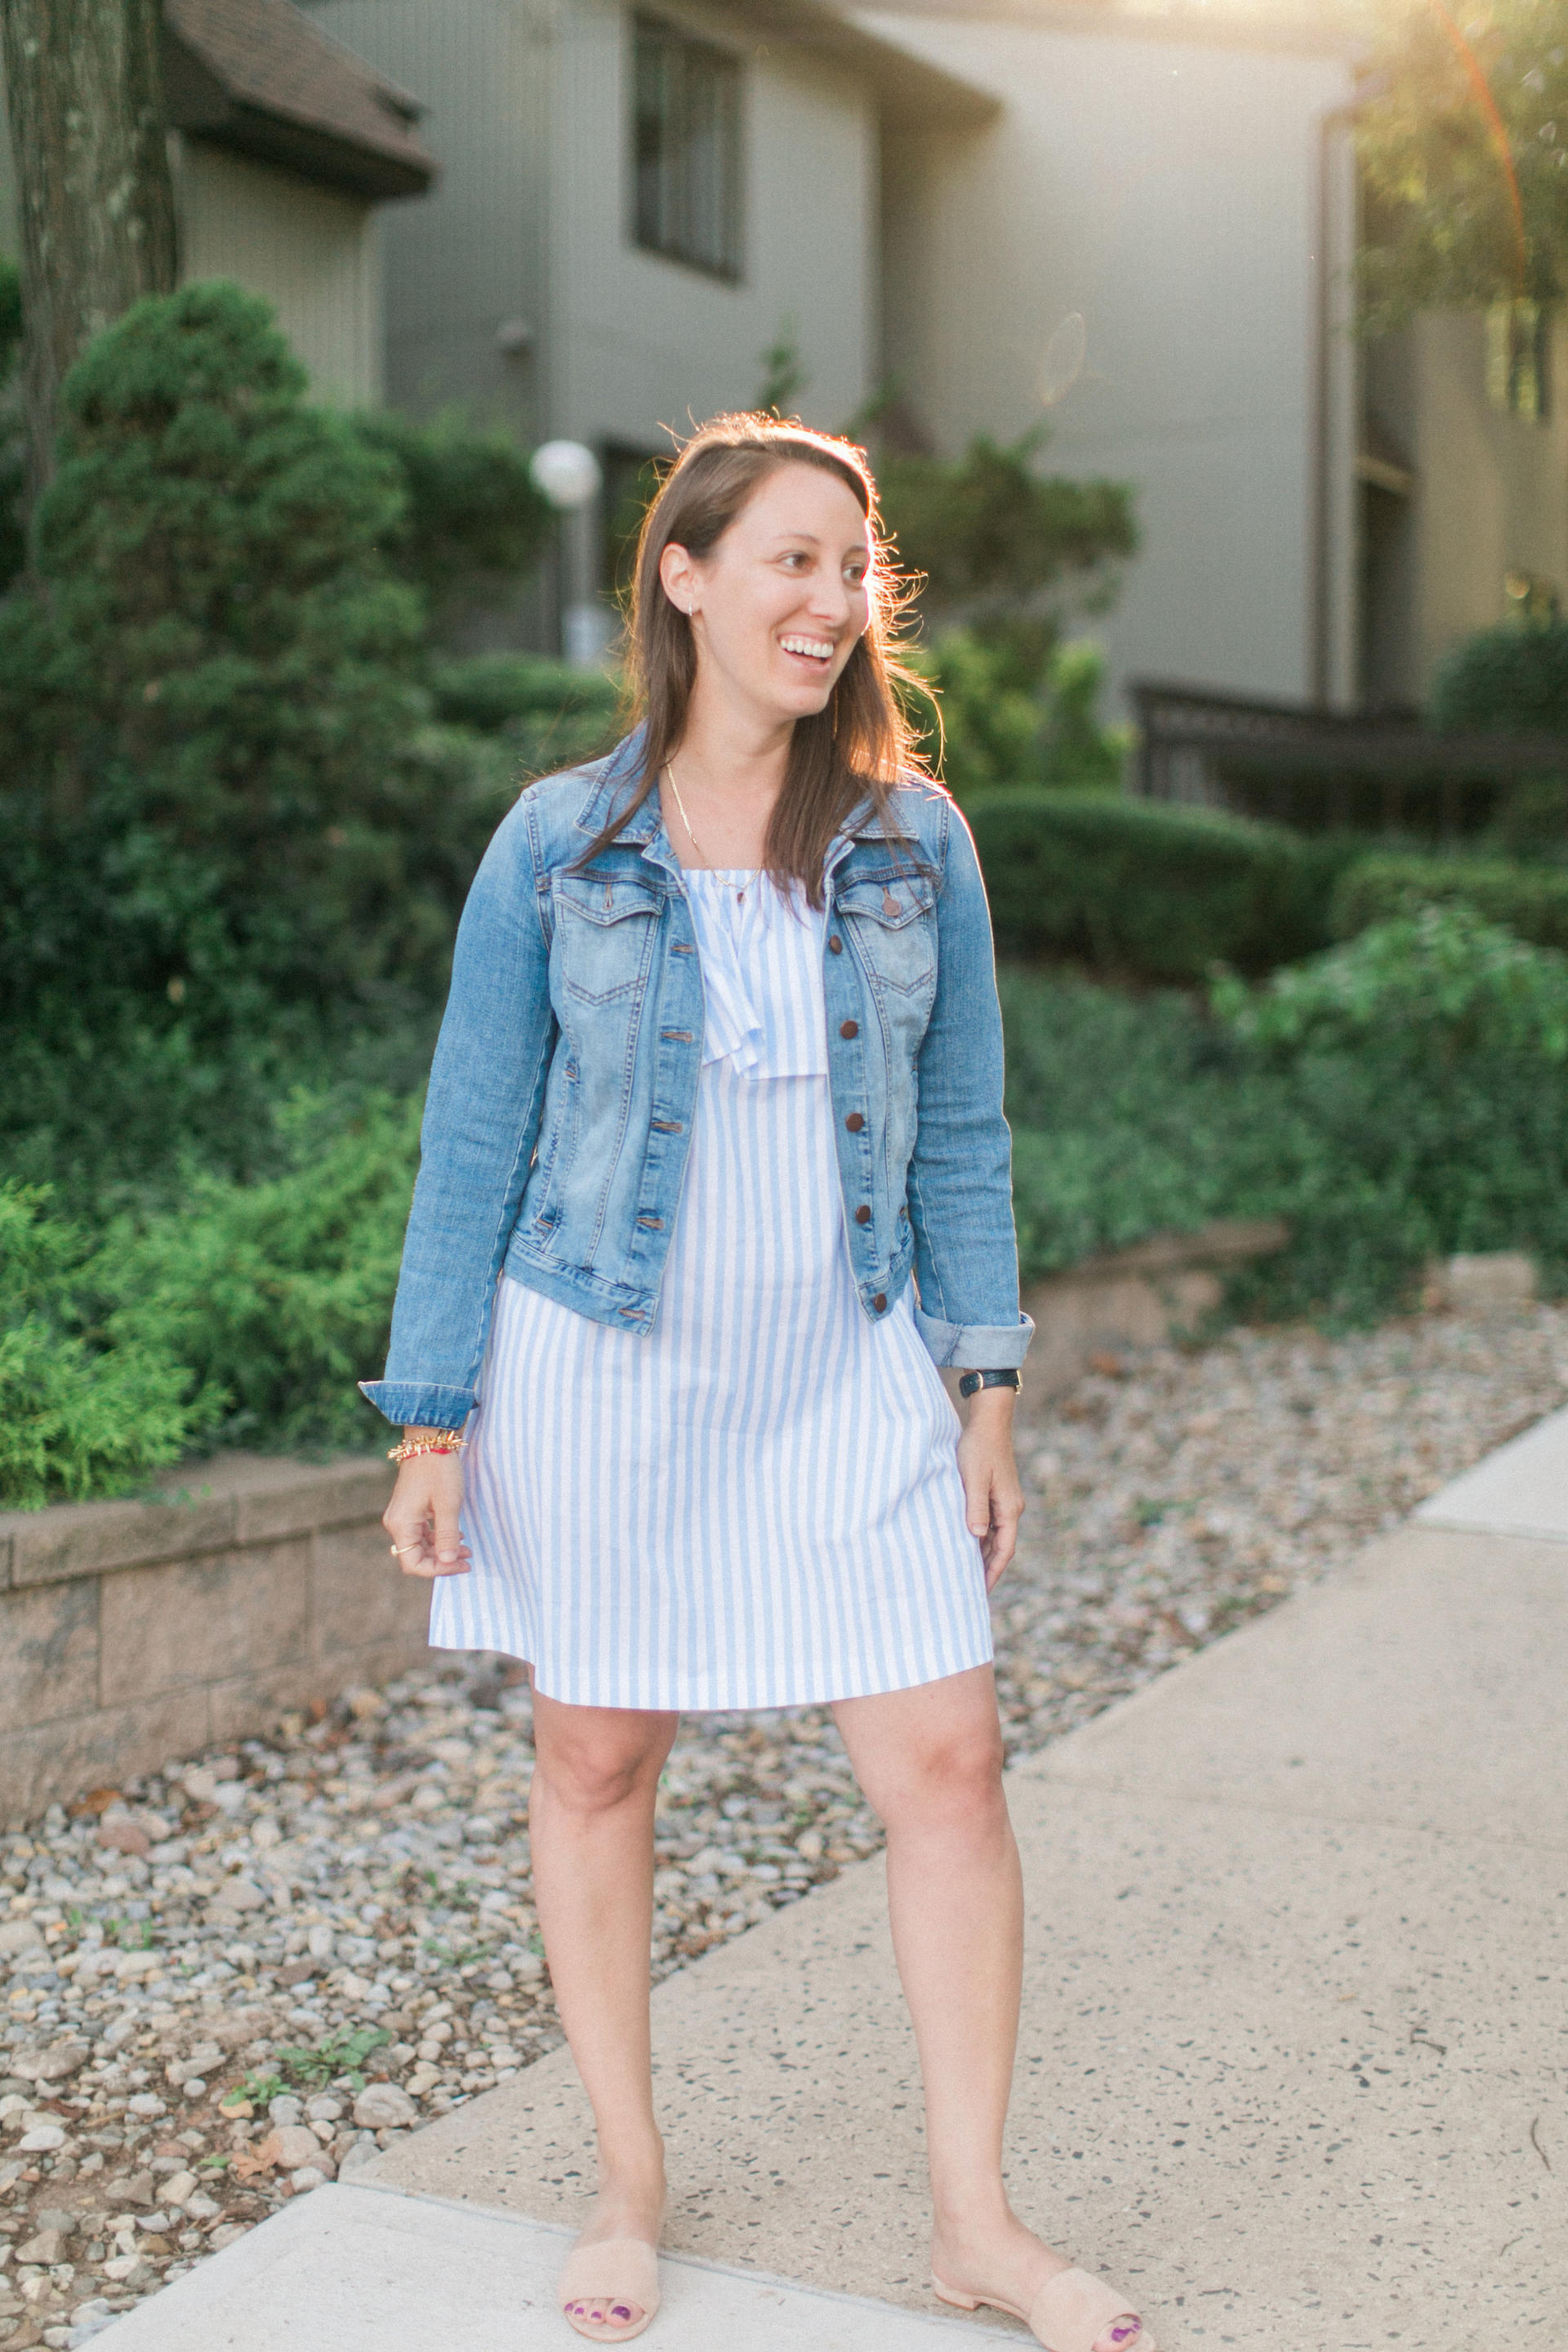 STYLE: Signet and Stripes